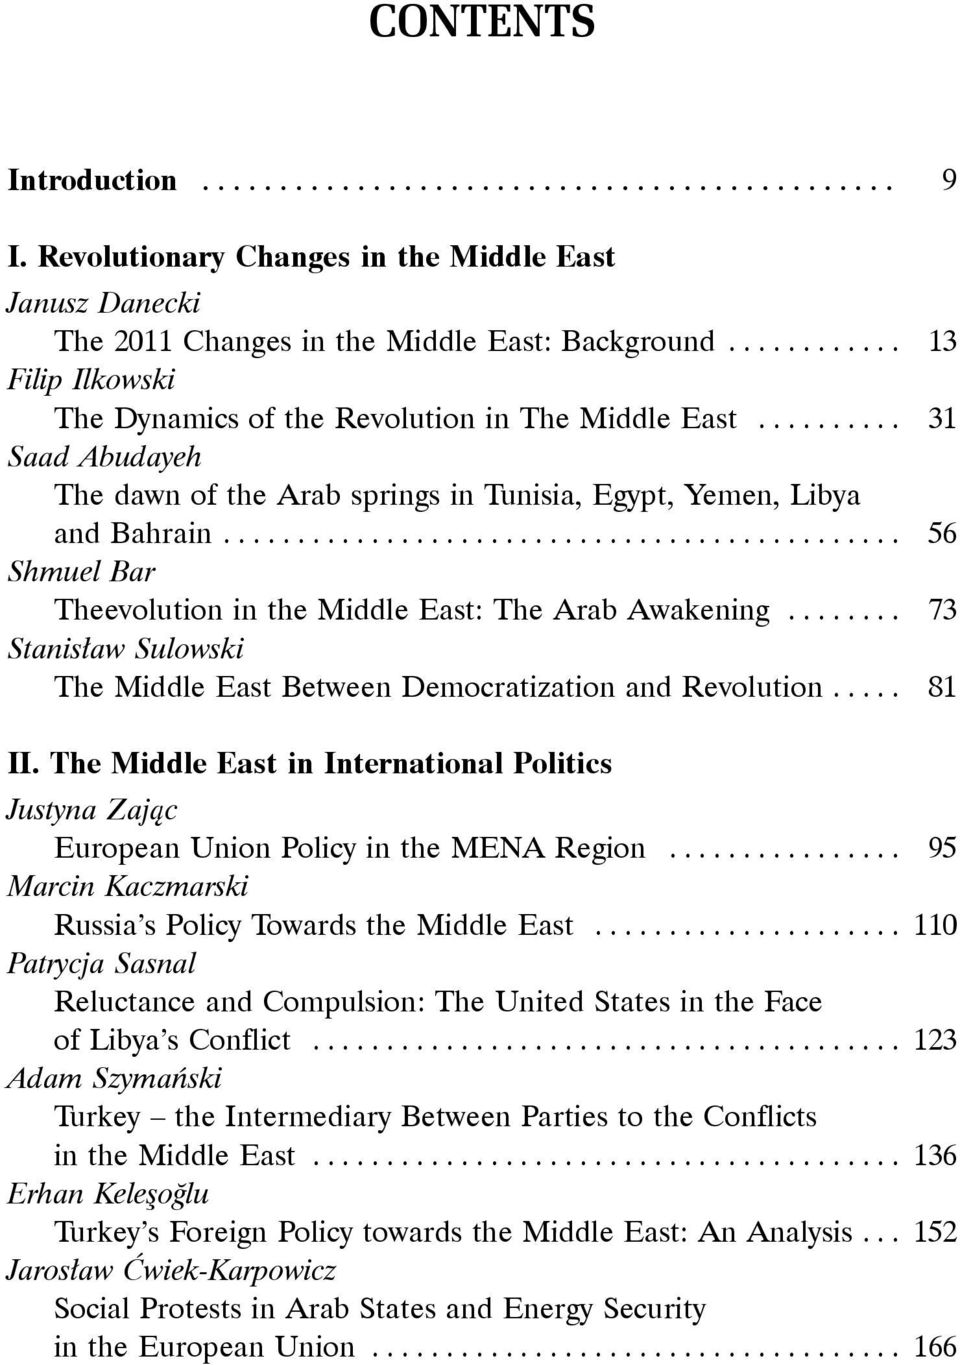 ............................................. 56 Shmuel Bar Theevolution in the Middle East: The Arab Awakening........ 73 Stanisław Sulowski The Middle East Between Democratization and Revolution.